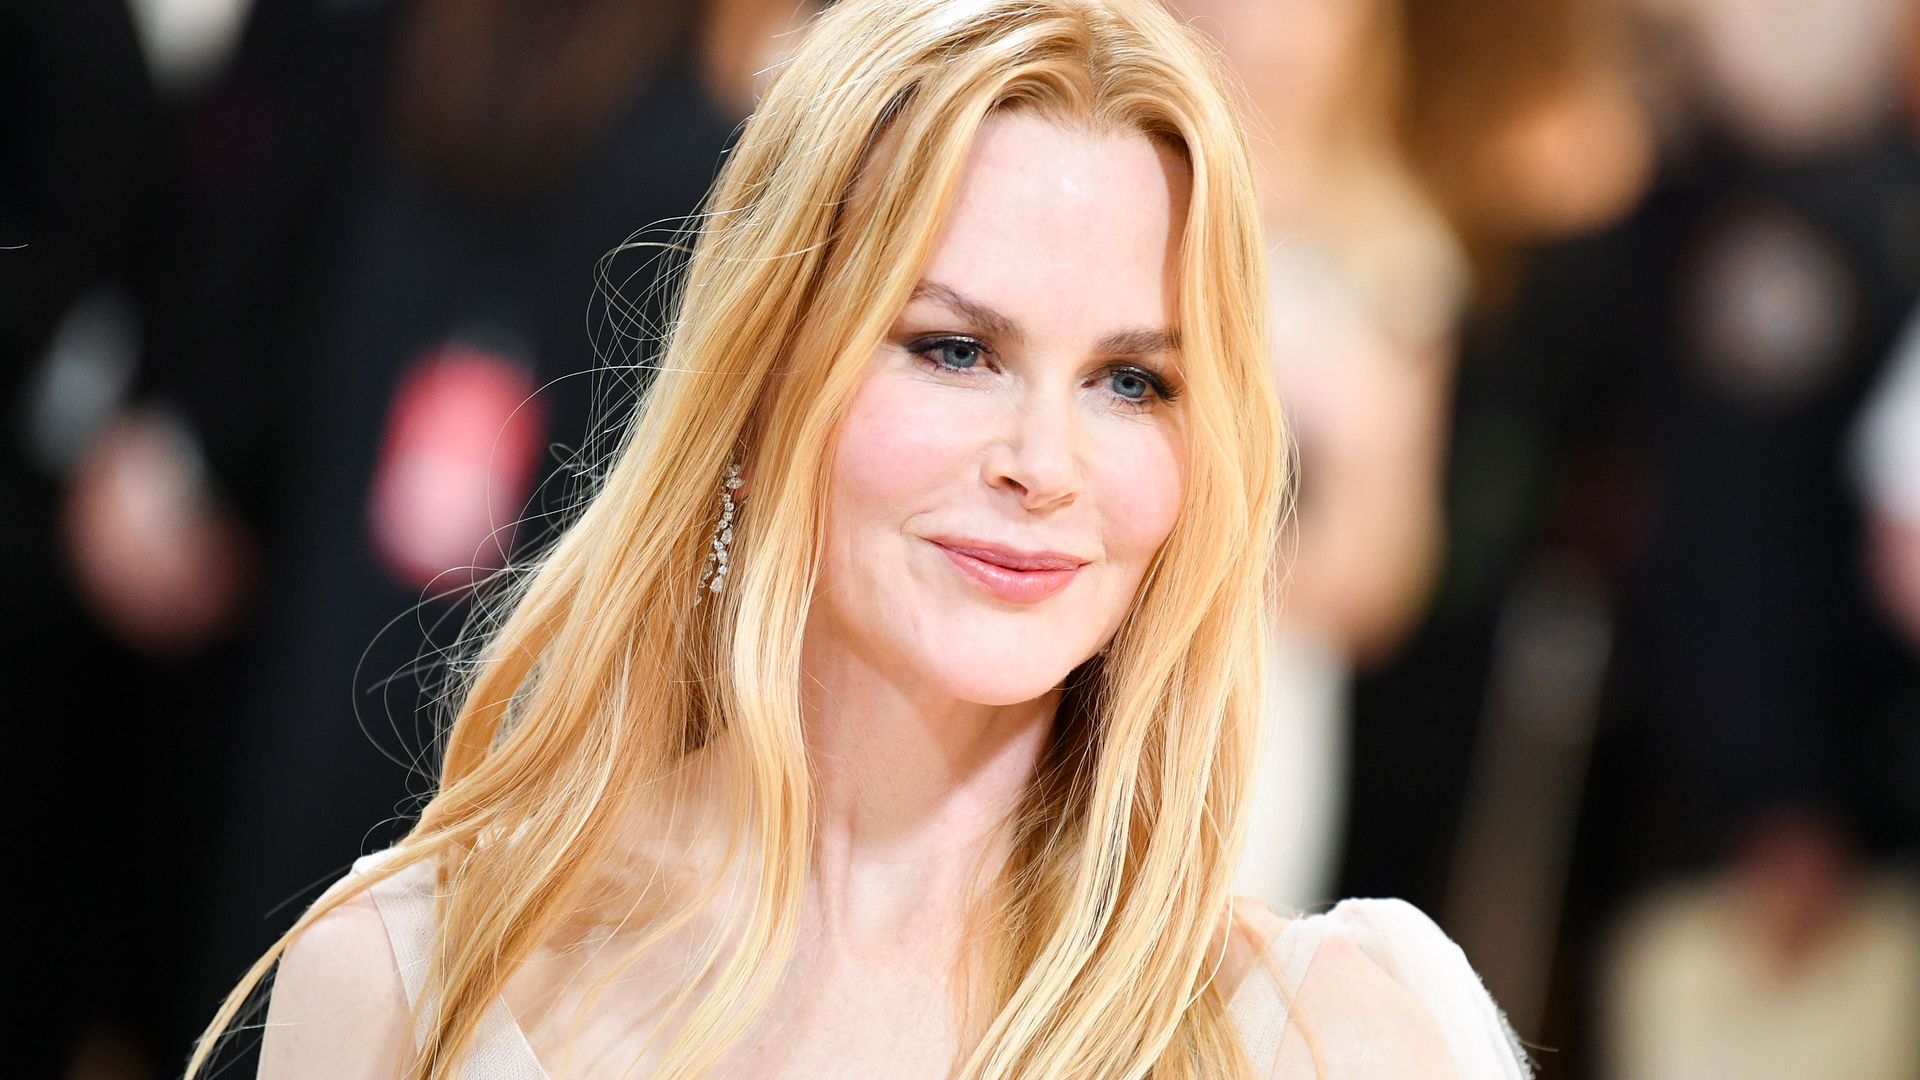 Nicole Kidman in a white dress with her hair down